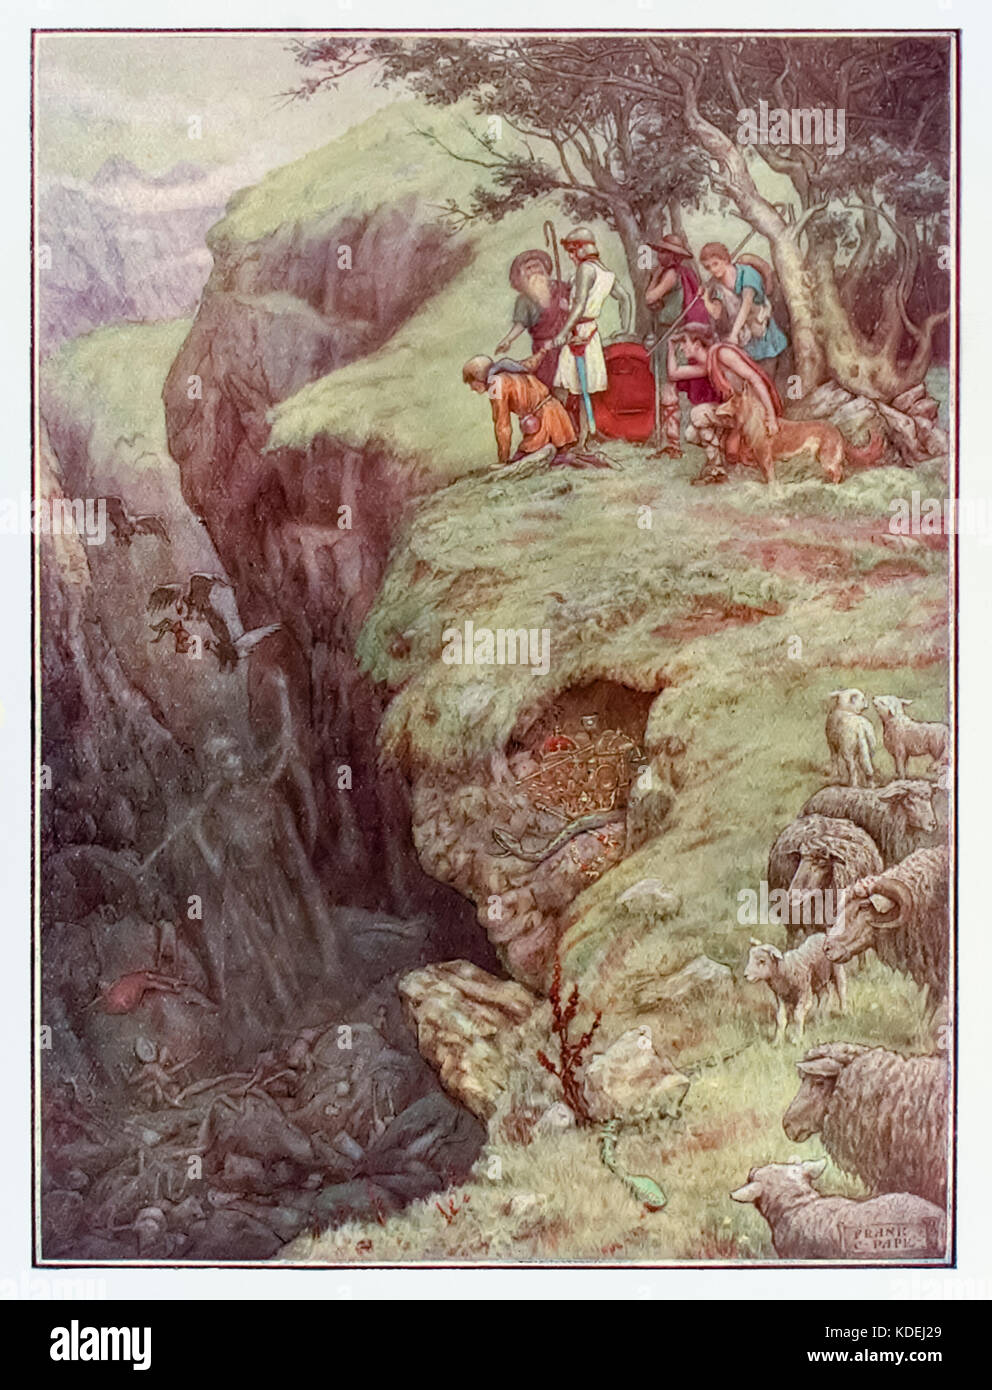 “The Shepherds take Christian and Hopeful to the top of the Hill of Error” from ‘The Pilgrim’s Progress’ by John Bunyan (1628-1688). Illustration by Frank C. Papé (1878-1972). The Shepherds Experience, Knowledge, Watchful, and Sincere guide Christian and Hopeful around the Delectable Mountains. See more information below. Stock Photo